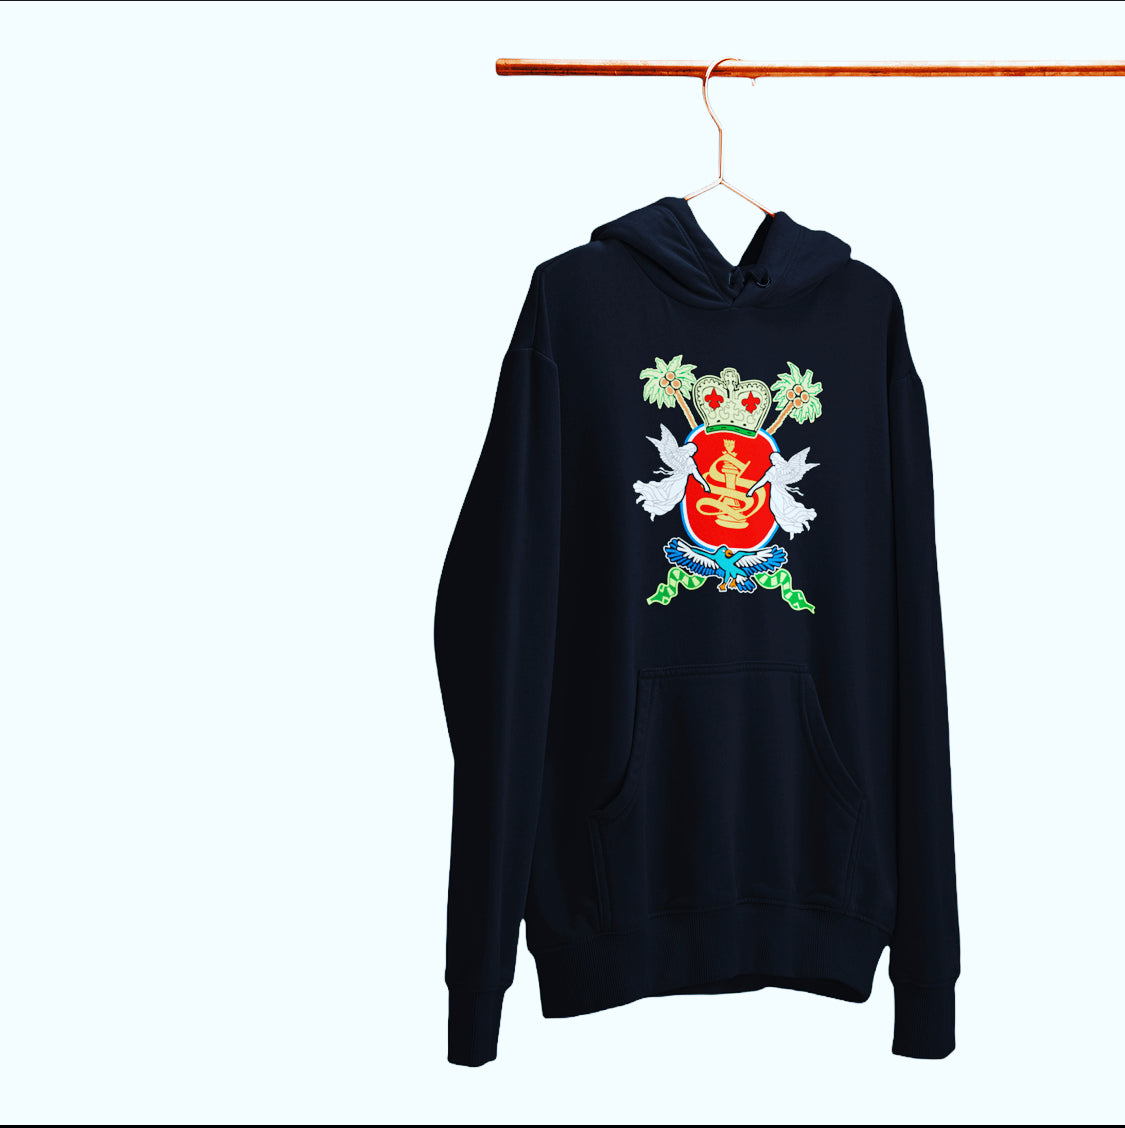 Exclusive Coat of Arms - Angels Hoodies - Men and Women **Limited Edition - TheSinners2Saints